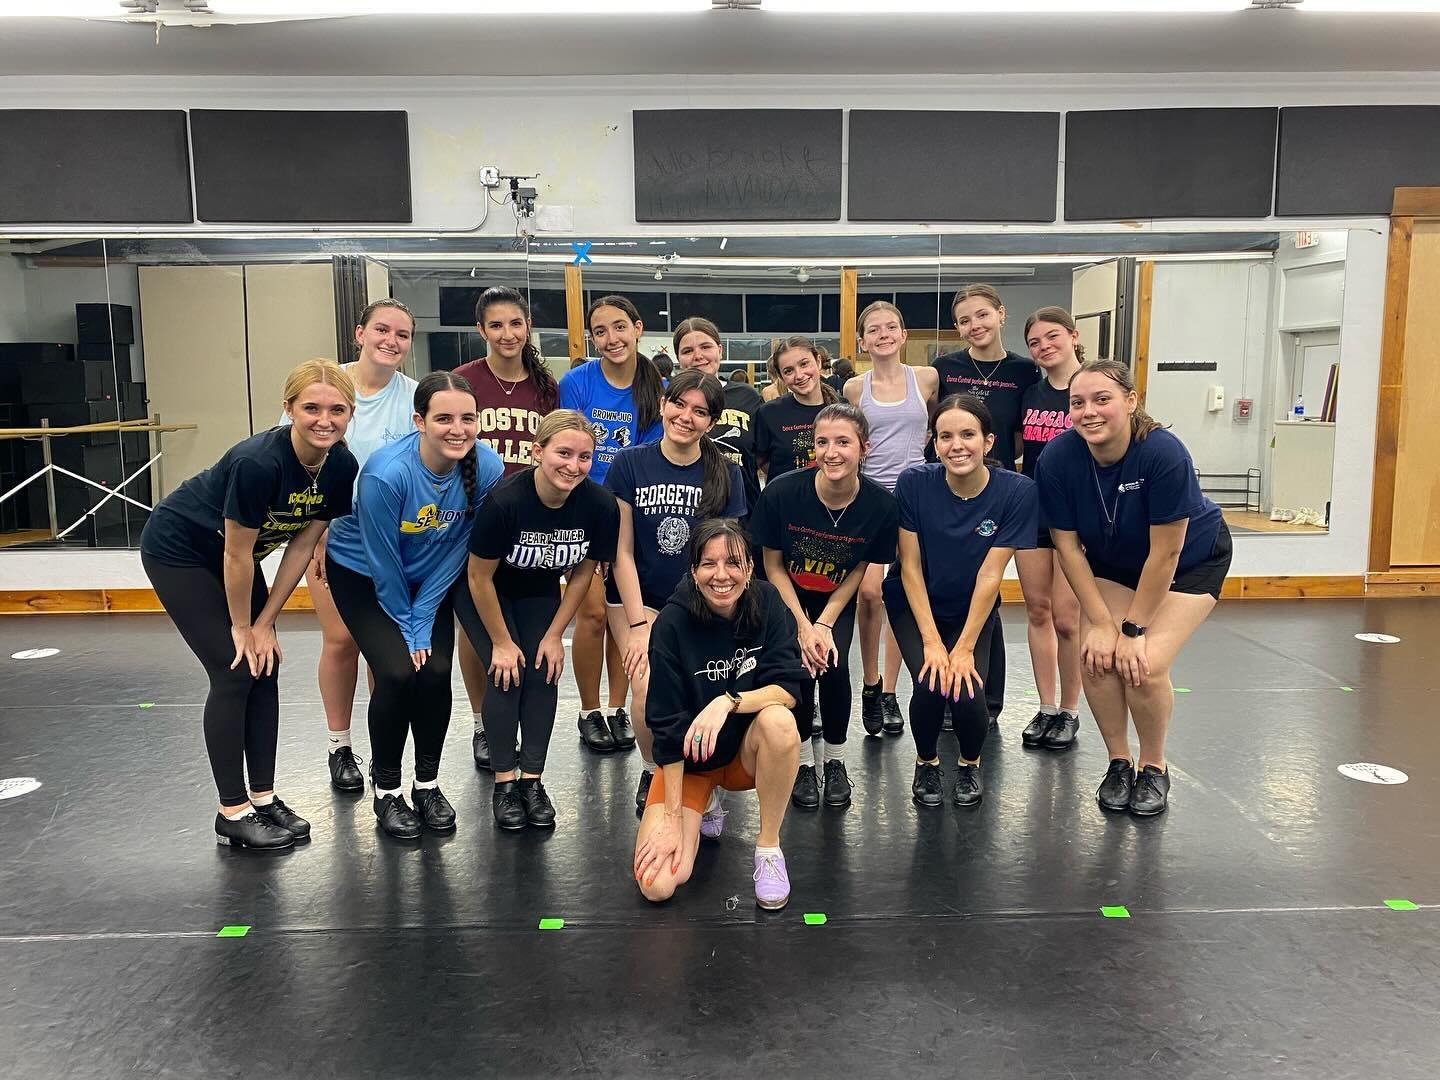 A great night at @dancecentralpa to start our Spring/Summer Tour!!! Thanks for having us! #tapclass #tapdancers #tapdance #wefoundcommonground